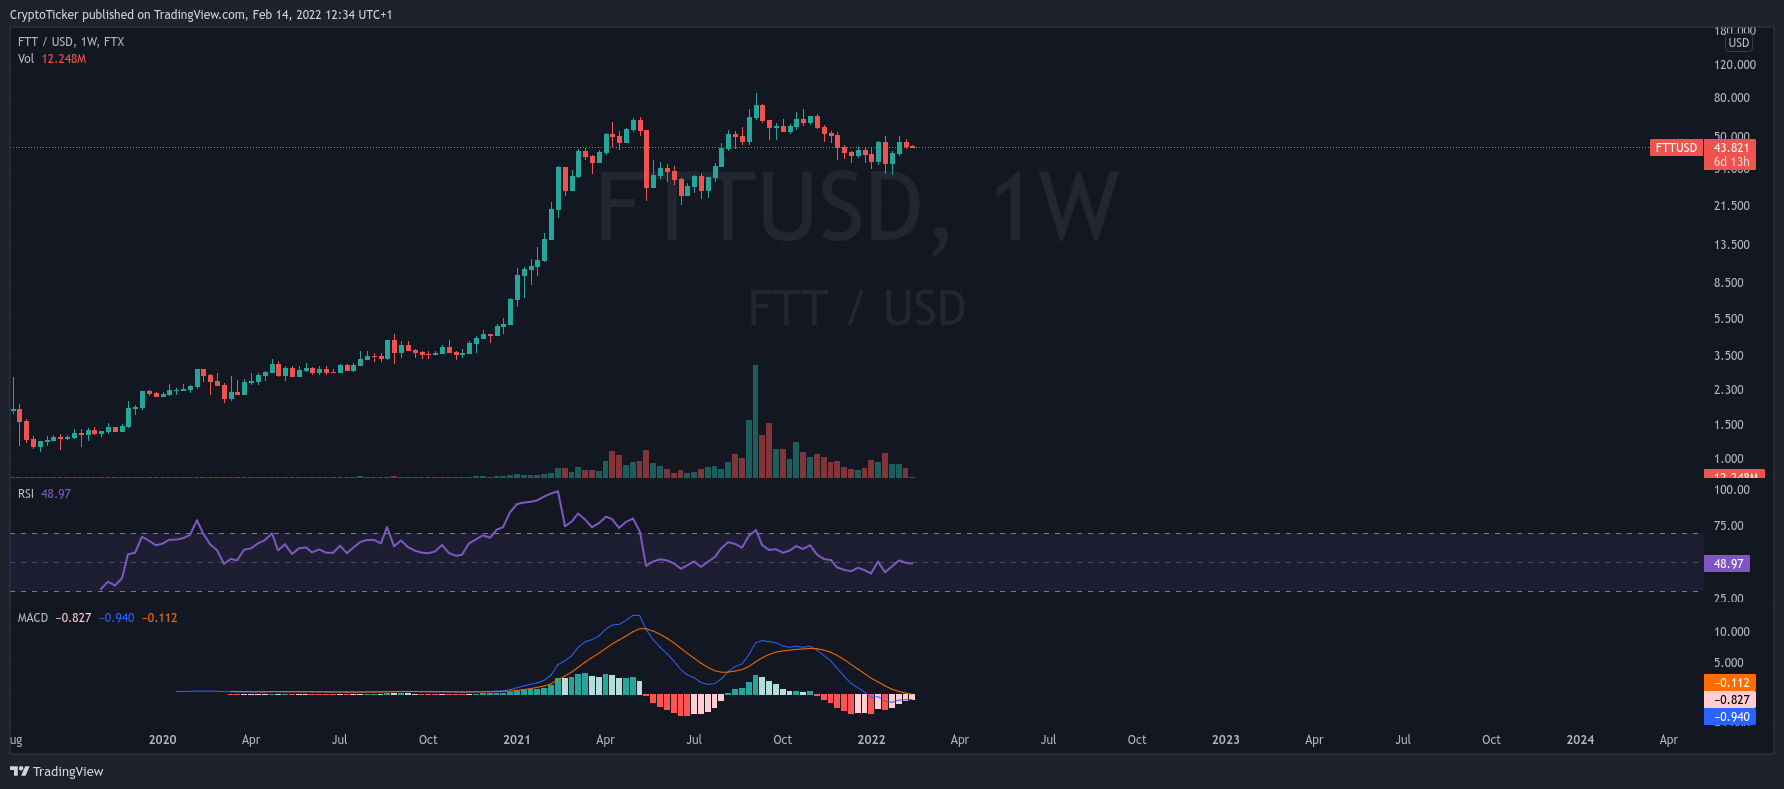 FTT/USD 1-week chart showing the uptrend of FTT